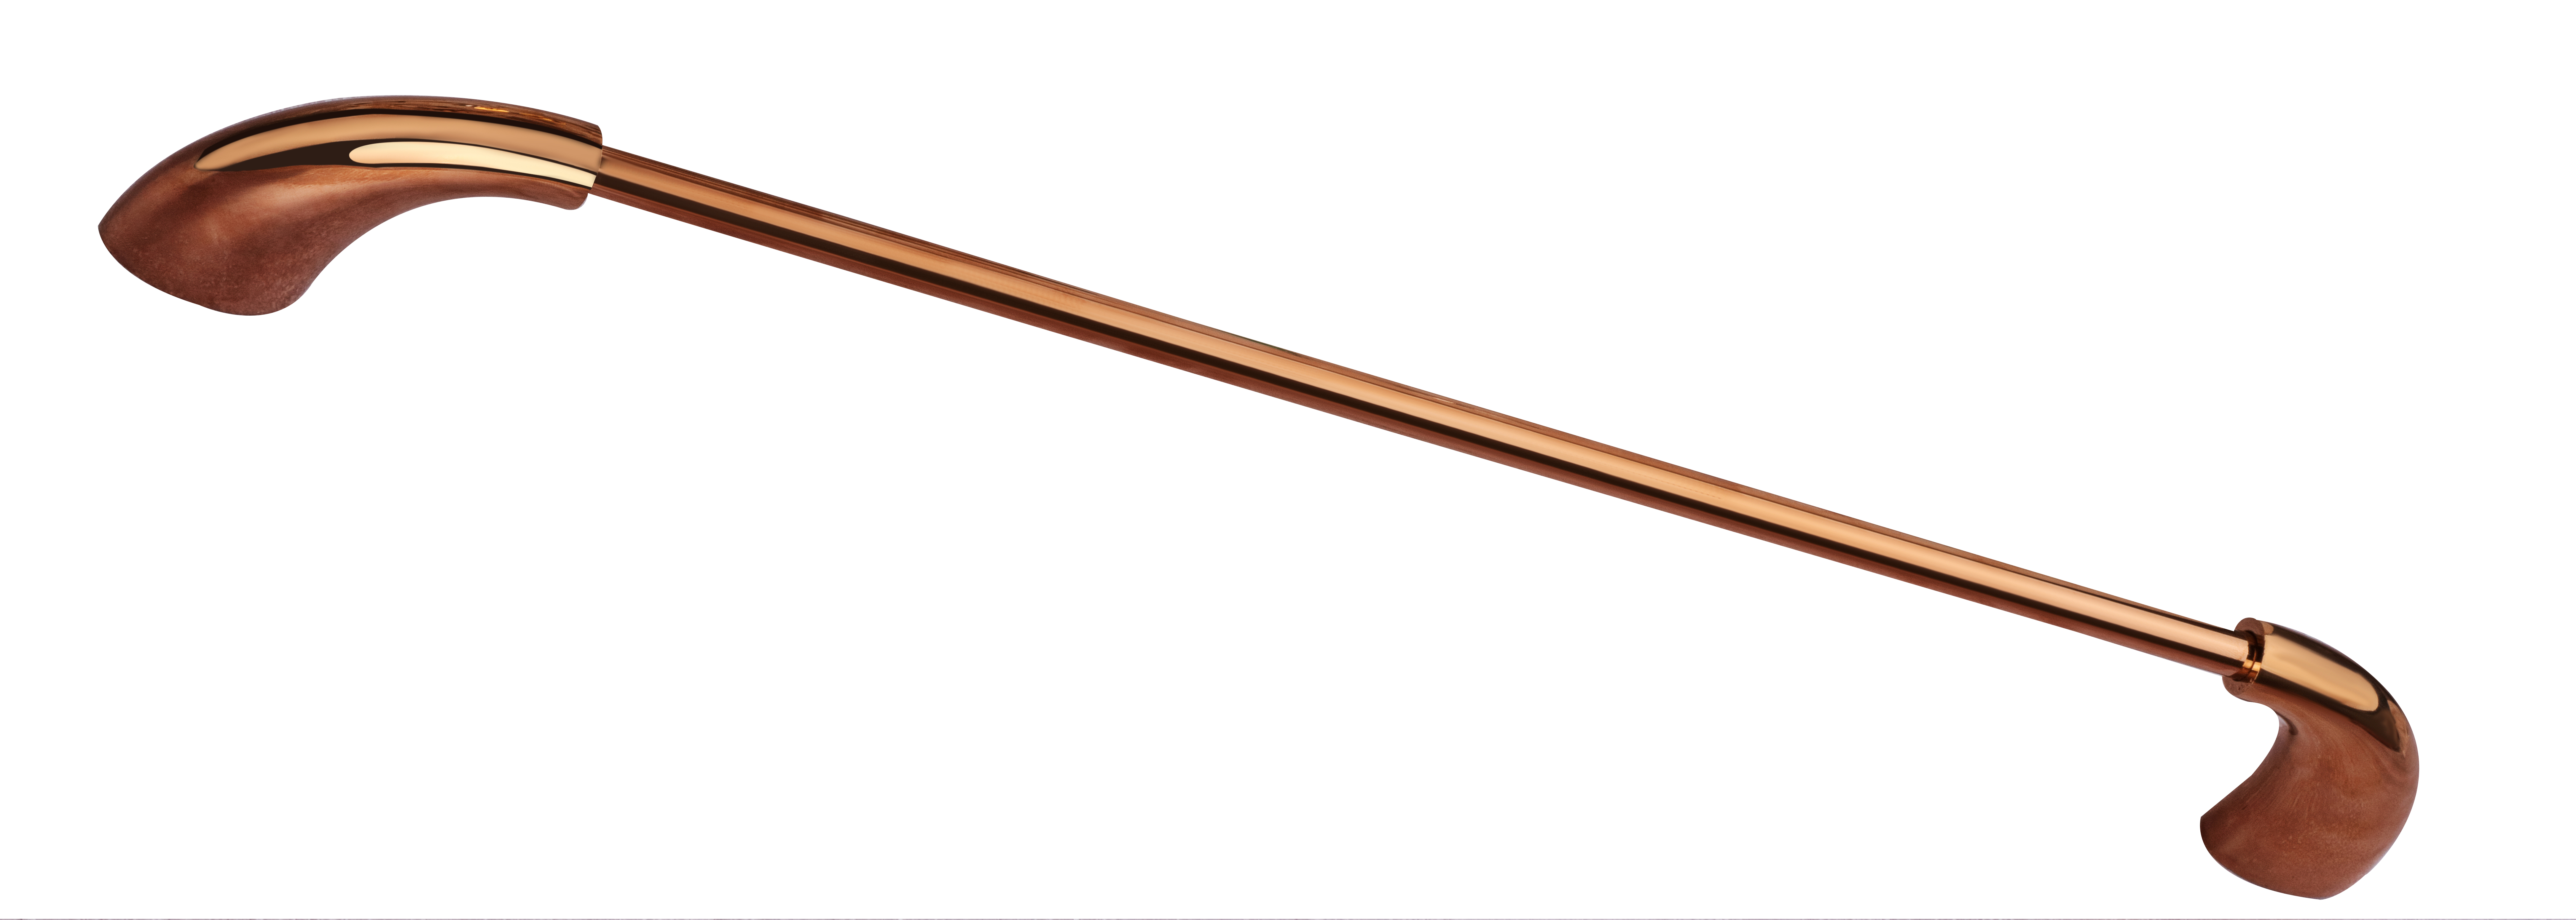 Aquieen Entice Wall Mounted Towel Rod 24" (Rose Gold)